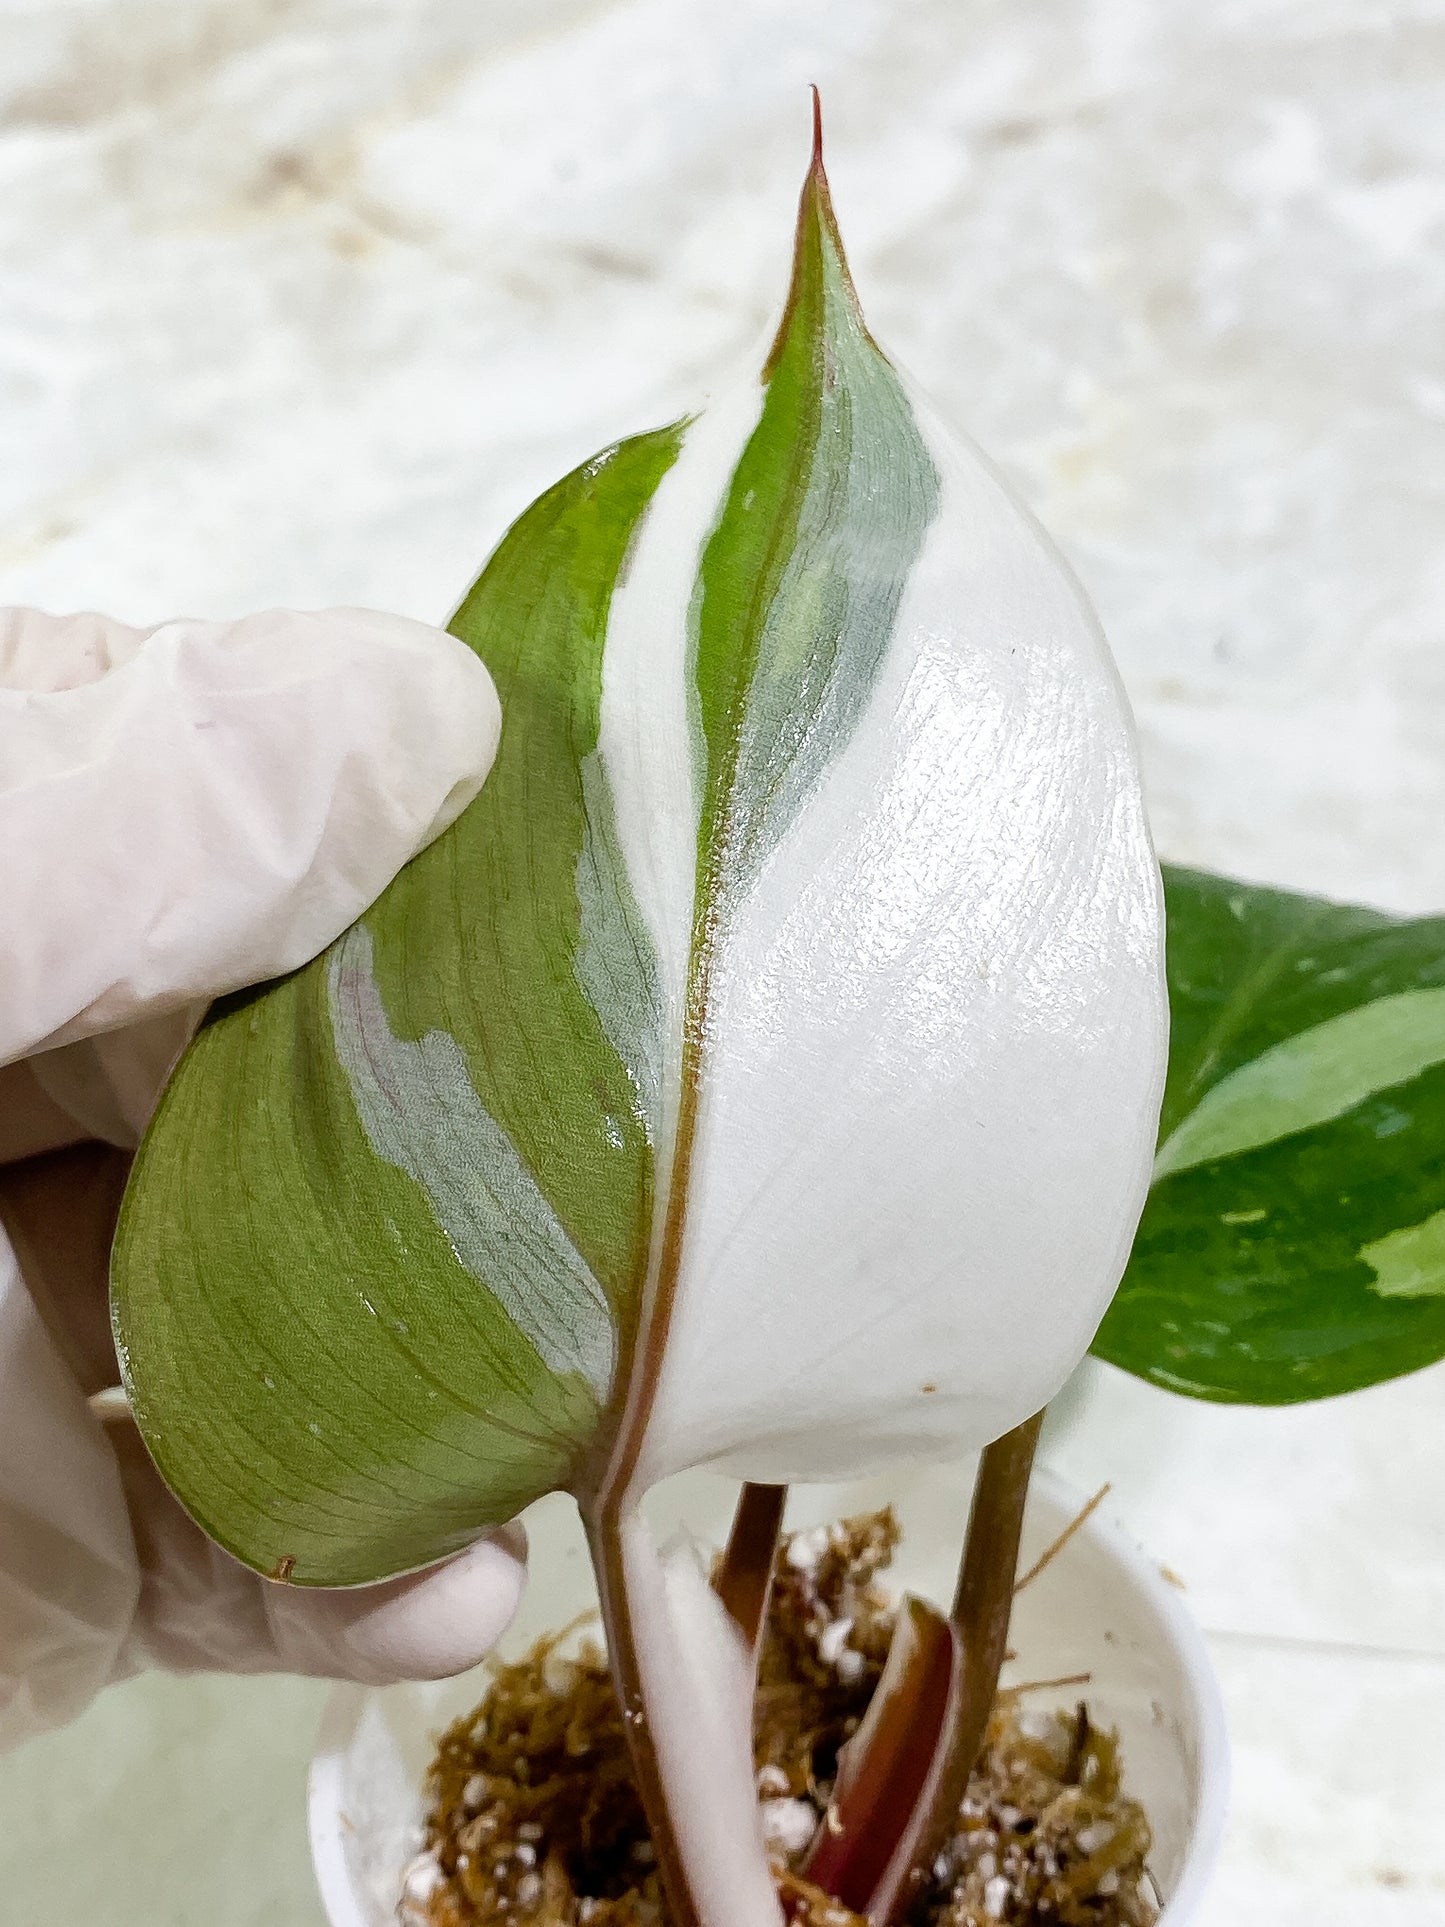 Philodendron White Knight tricolor Rooting Top Cutting 3 leaves (2 half moon)